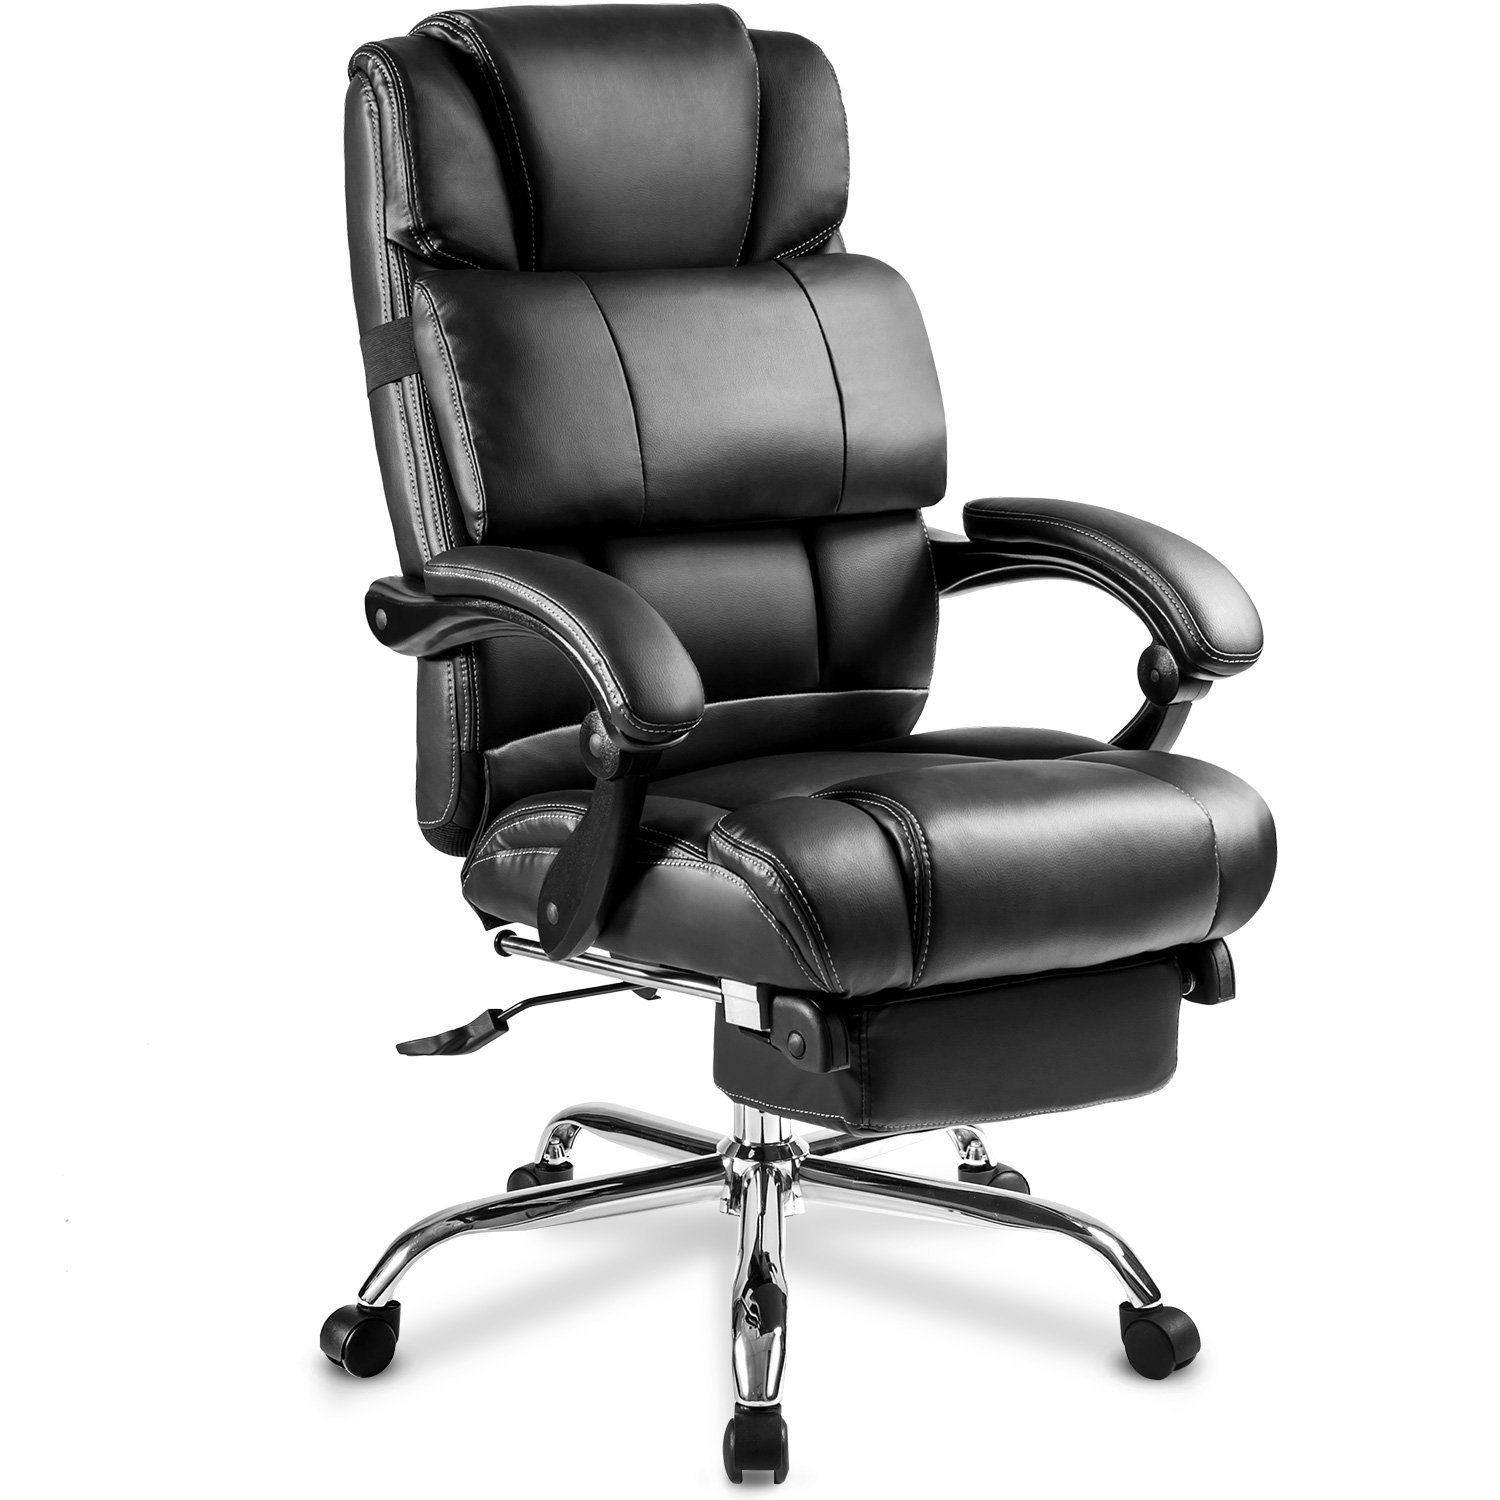 Merax Ergonomic Leather Big & Tall Office Chair with Footrest, Black